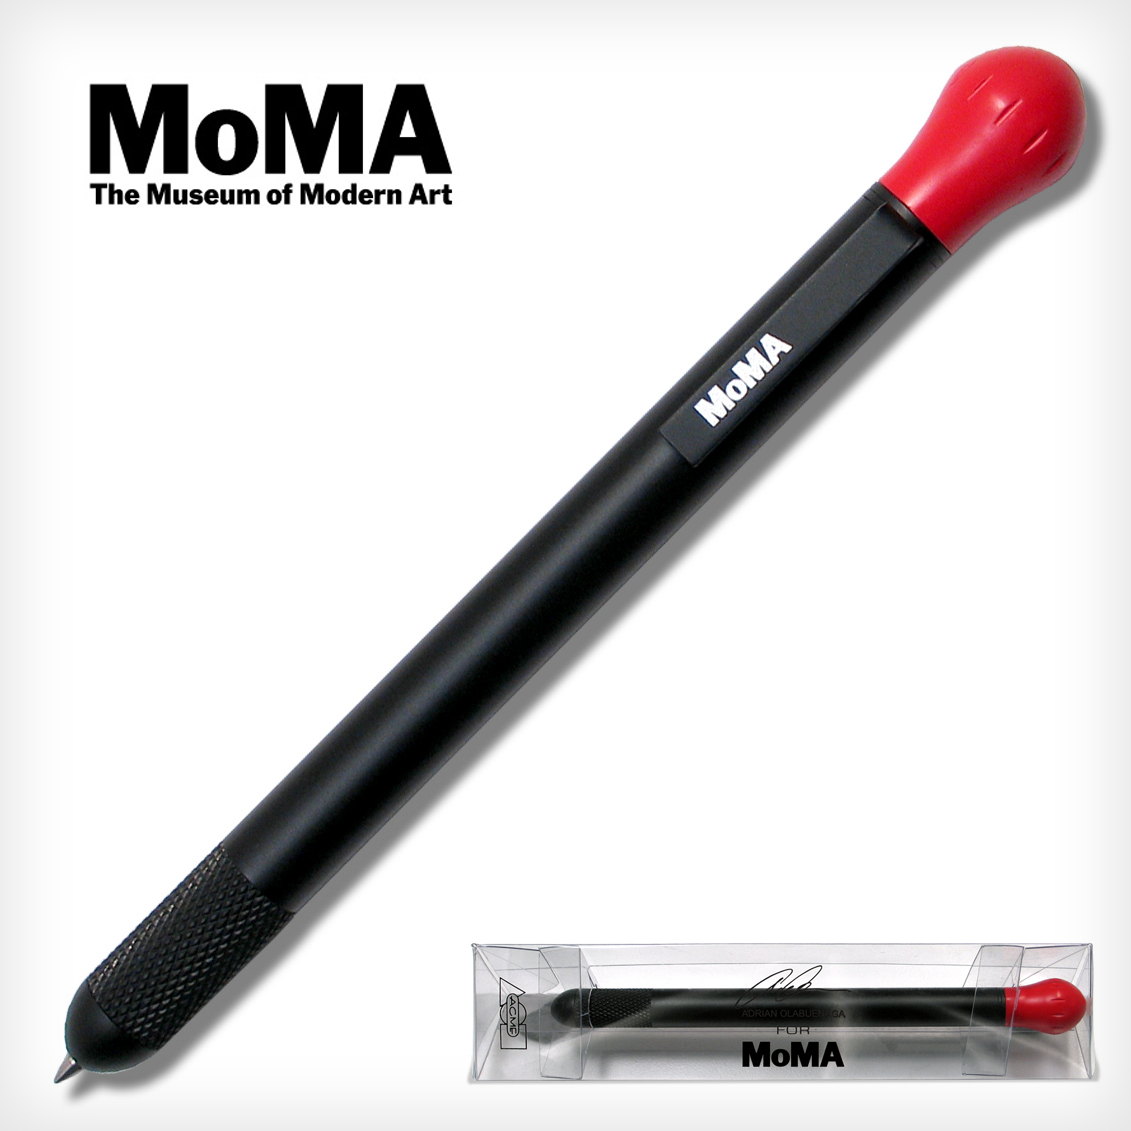 “Ogma” Retractable Roller Ball for MOMA